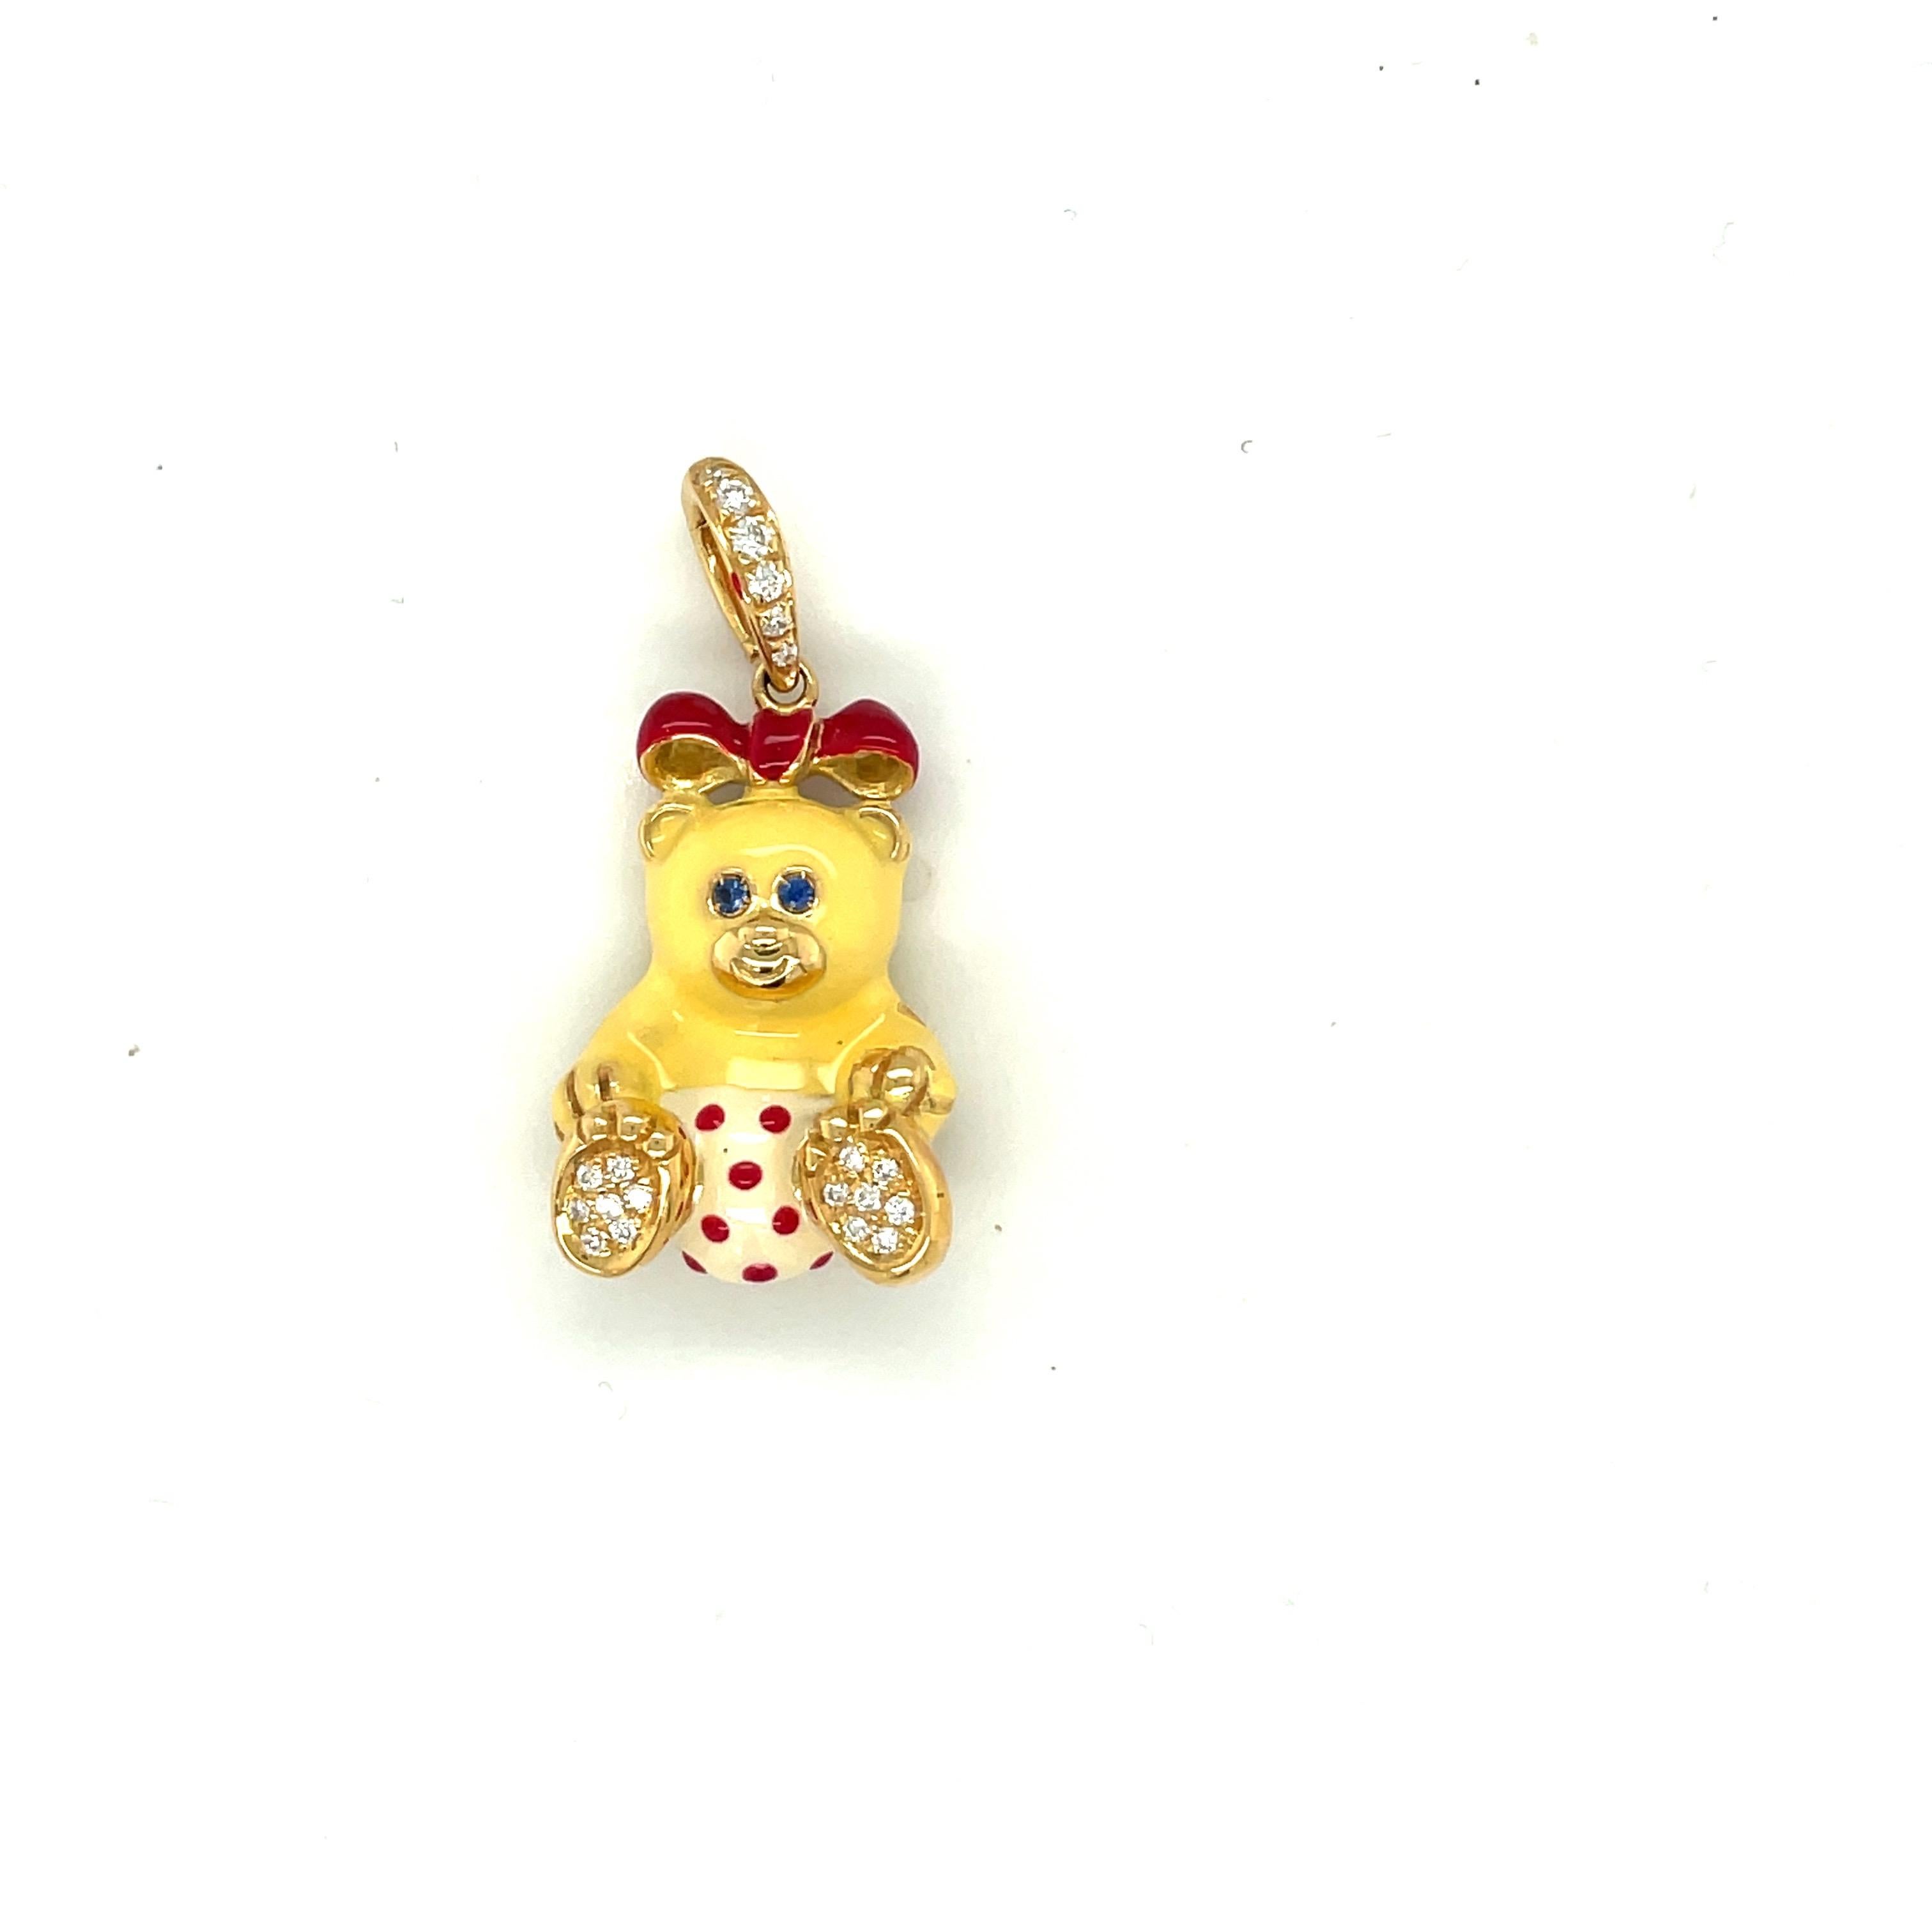 Just the cutest....Teddy bear charm made exclusively for Cellini by Ambrosi of Italy.

This 18 karat yellow gold teddy bear is set with round brilliant pave diamonds on her paws . She has blue sapphire eyes . Her body is yellow enamel and her outfit